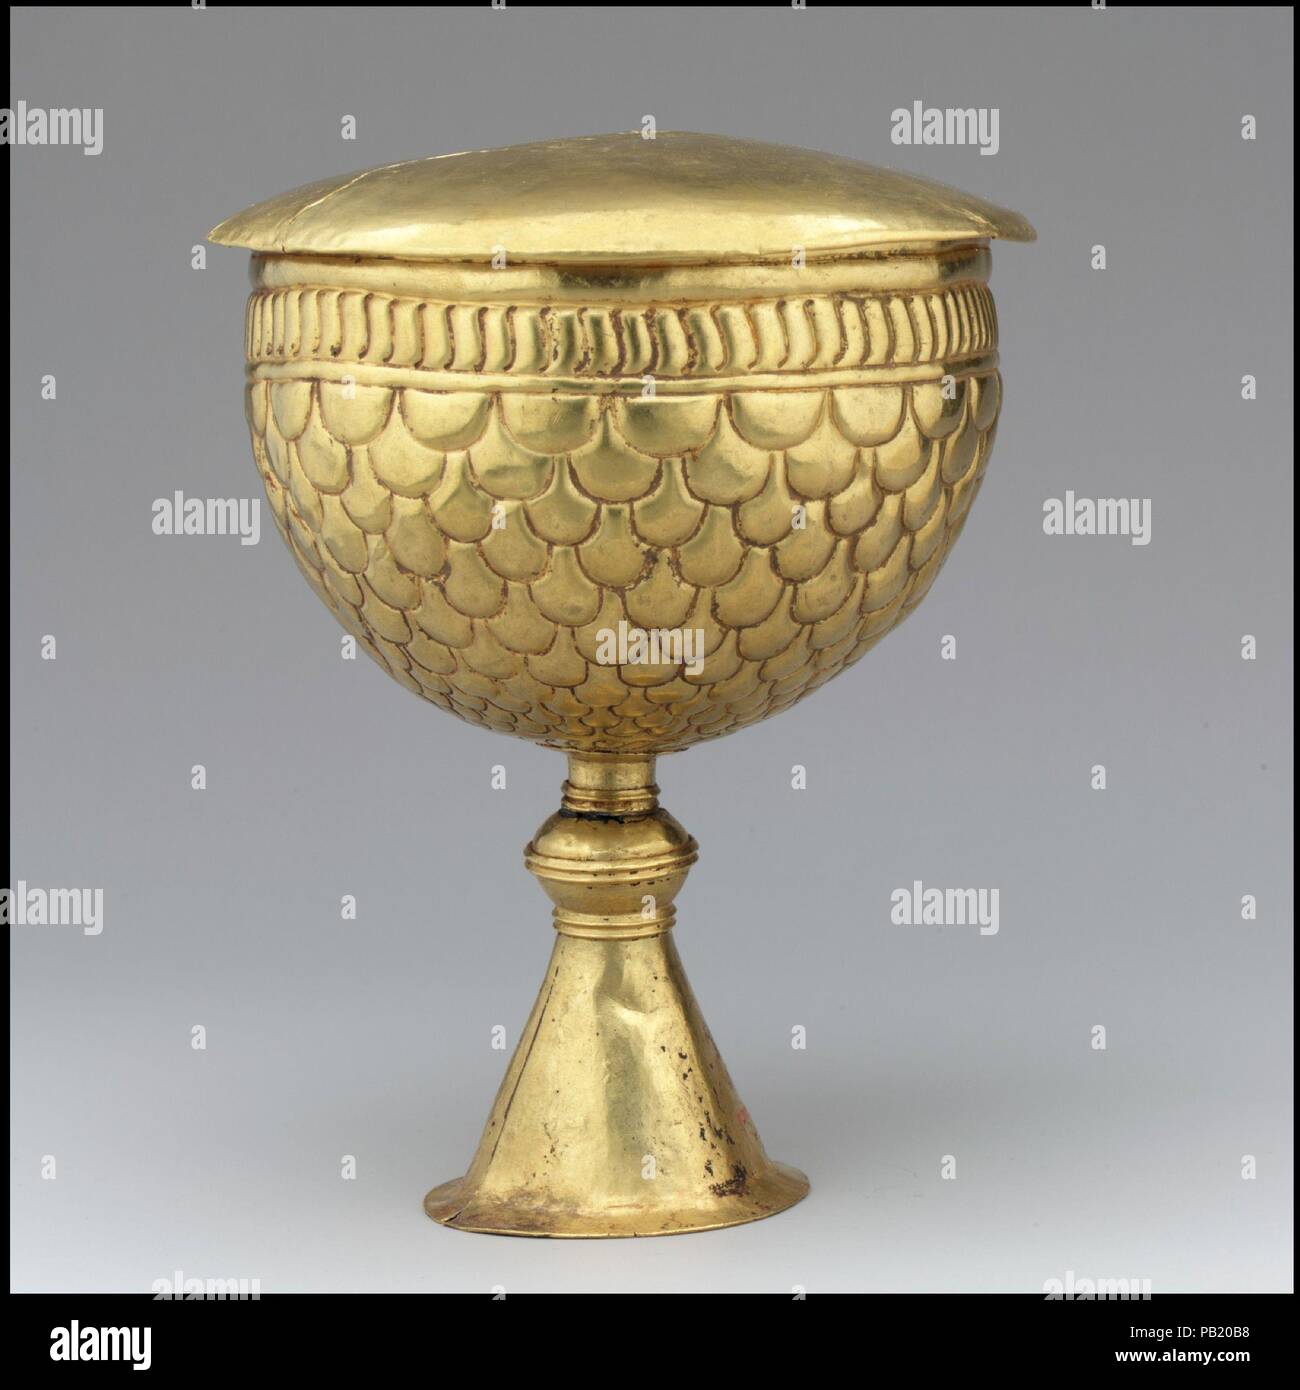 Gold Goblet and Cover (?). Culture: Avar or Byzantine. Dimensions: a only: 6 5/8 × 4 3/4 in., 13.439 Troy Ounces (16.8 × 12.1 cm, 418g)  b only: 1.993 Troy Ounces (62g). Date: 700s.  This goblet may in fact be a Byzantine export, though the foot of the cup does not conform to the standard shape of Byzantine chalices.  The Avars  The Avars were a nomadic tribe of mounted warriors from the Eurasian steppe. The Byzantine emperor Justinian negotiated with them in the sixth century to protect the Empire's northern border along the Black Sea. Emboldened by their subjugation of numerous tribes, they  Stock Photo